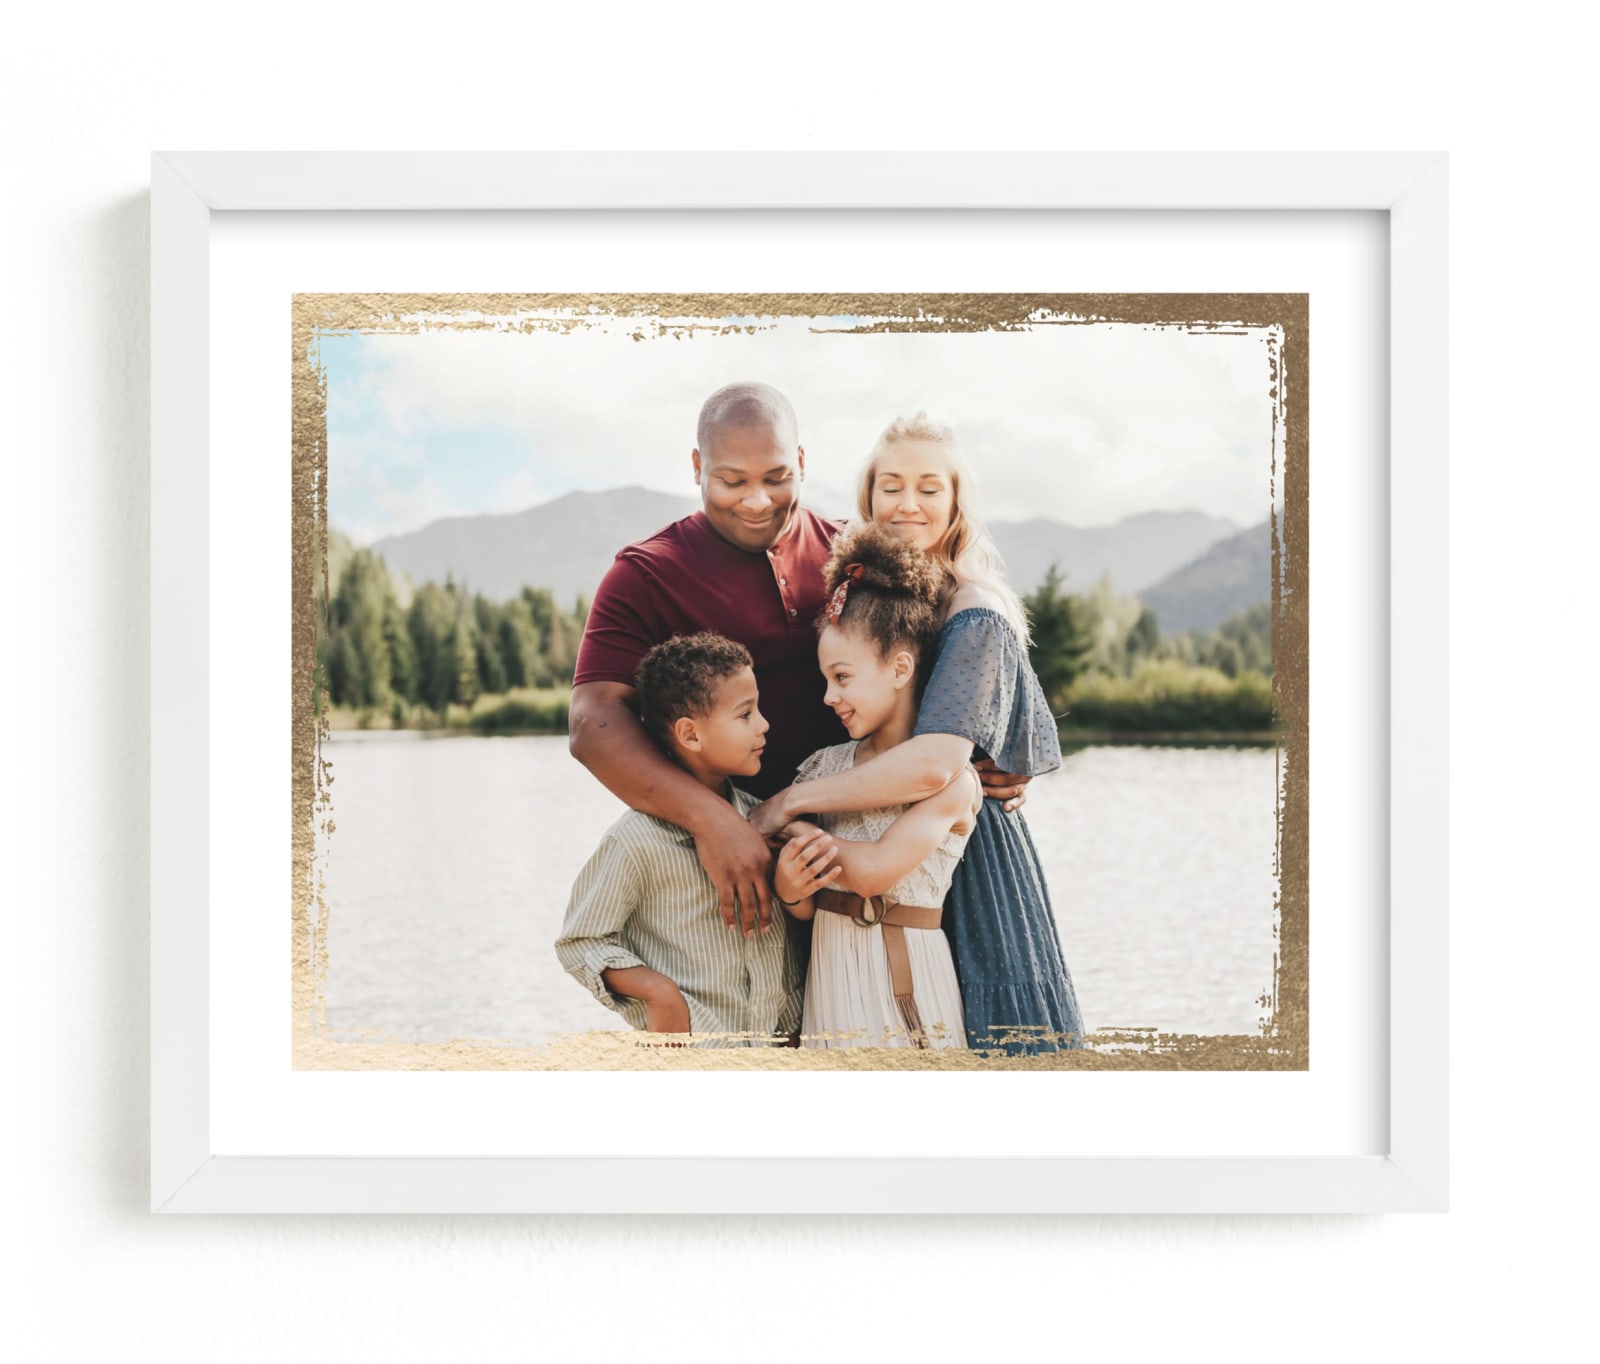 This is a gold foil stamped photo art by cambria called Rustic Frame.